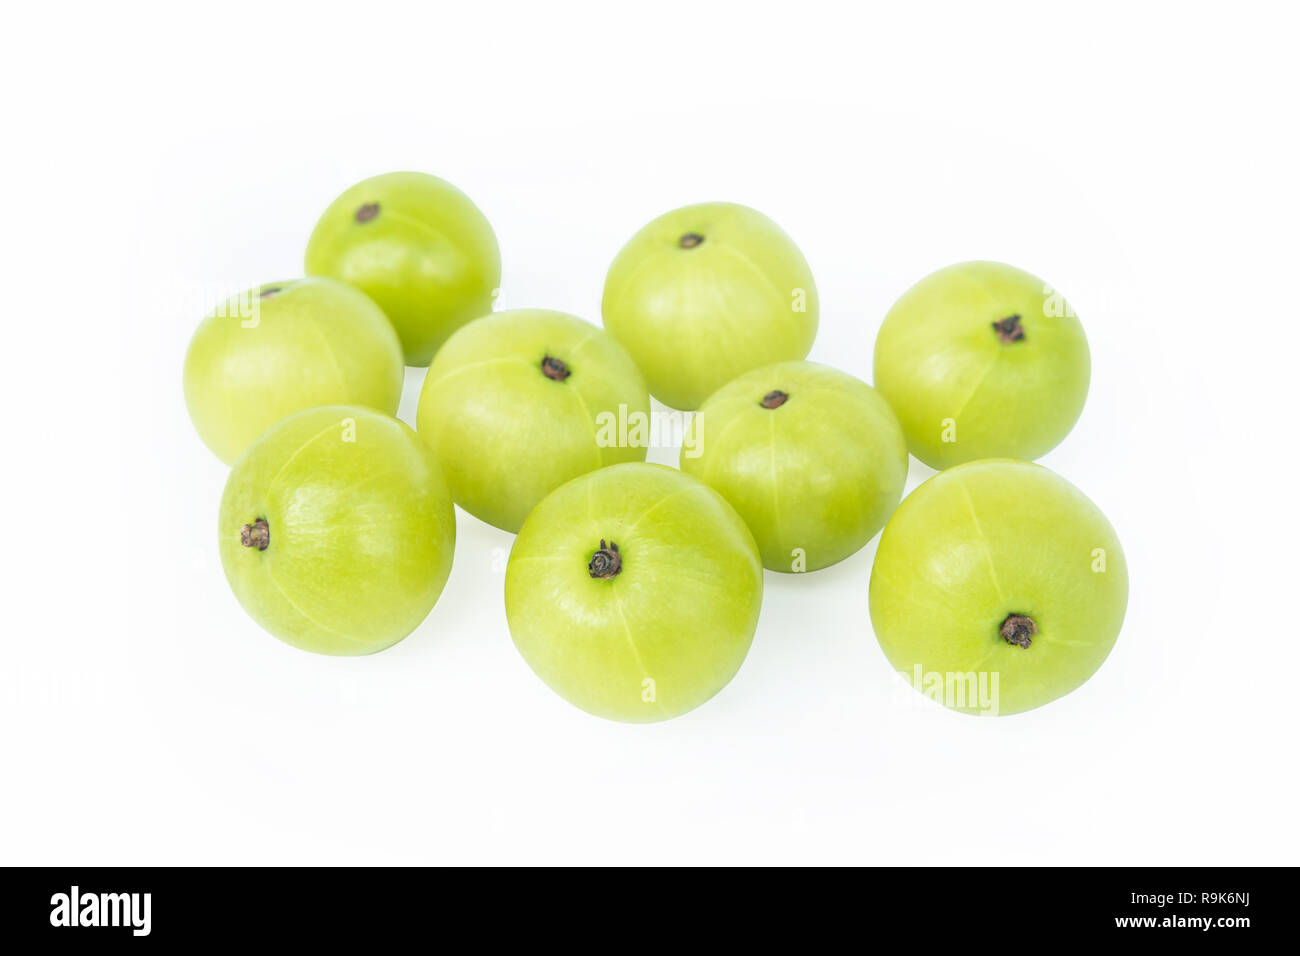 Indian gooseberry or Amla (Phyllanthus emblica) isolated on white background with clipping path Stock Photo